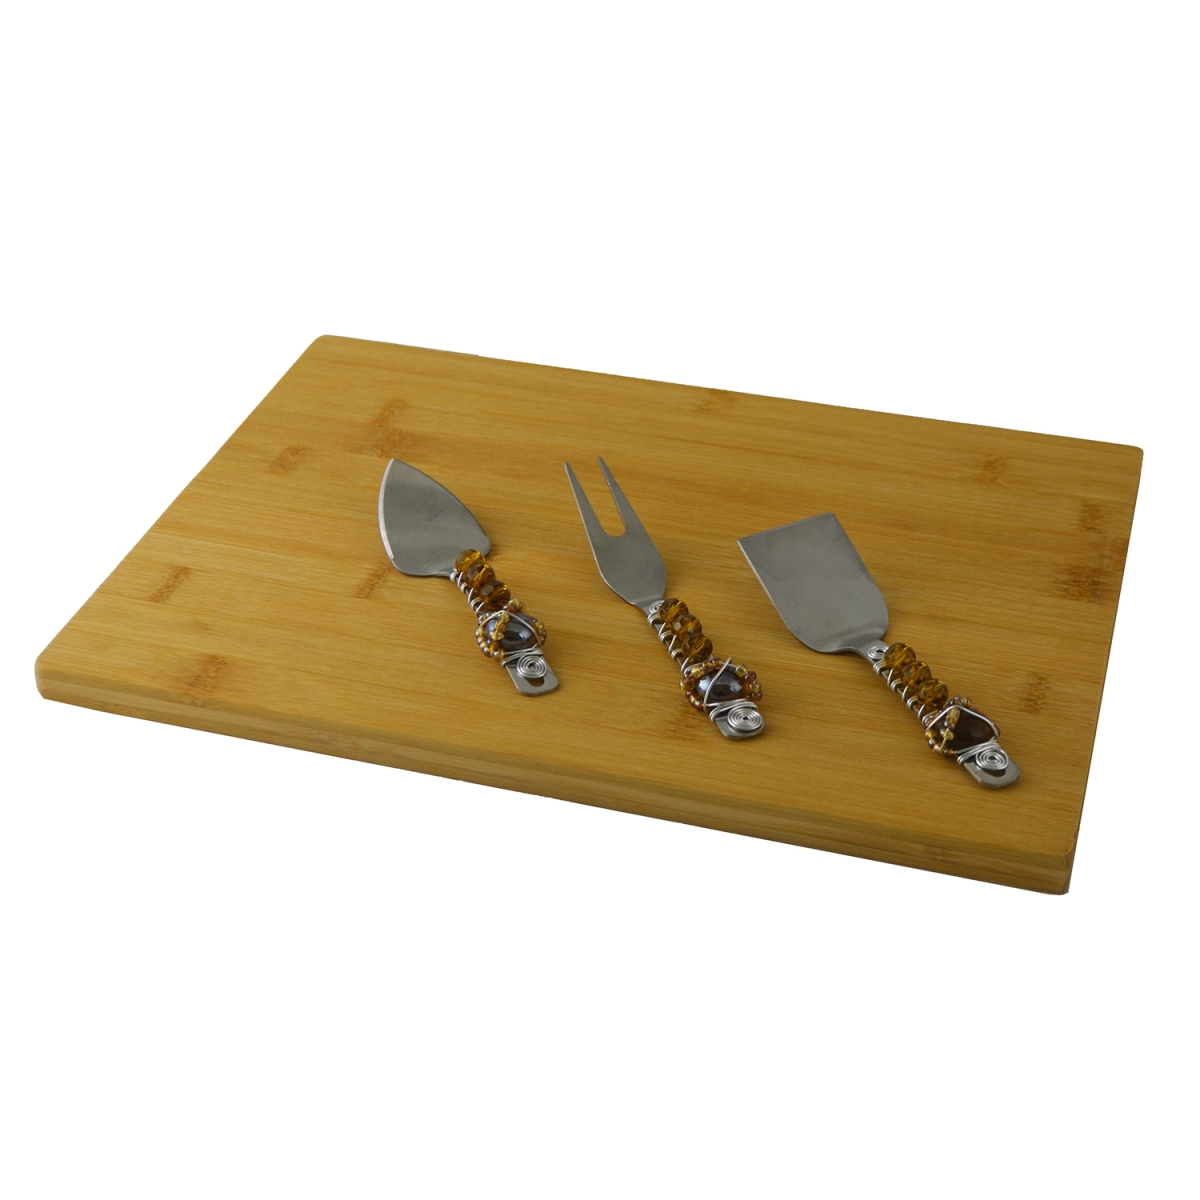 Picture of Three Star SX3120 13.25 x 9.5 in. Amber Stones Cheese Board With Utensil Set - 3 Piece